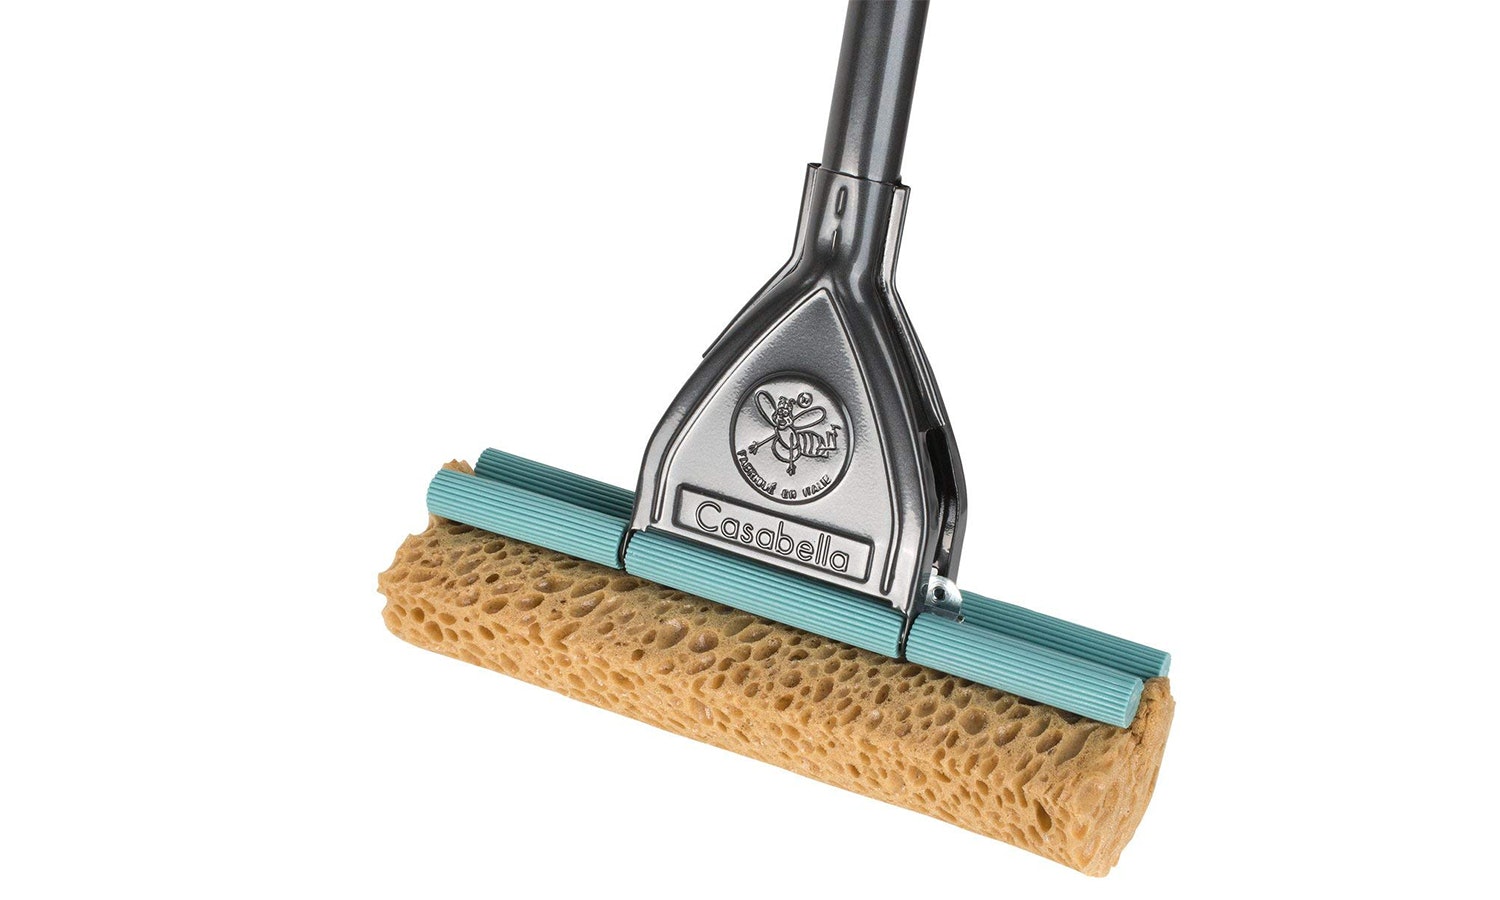 how to use sponge mop so the dirt doesnt just move around